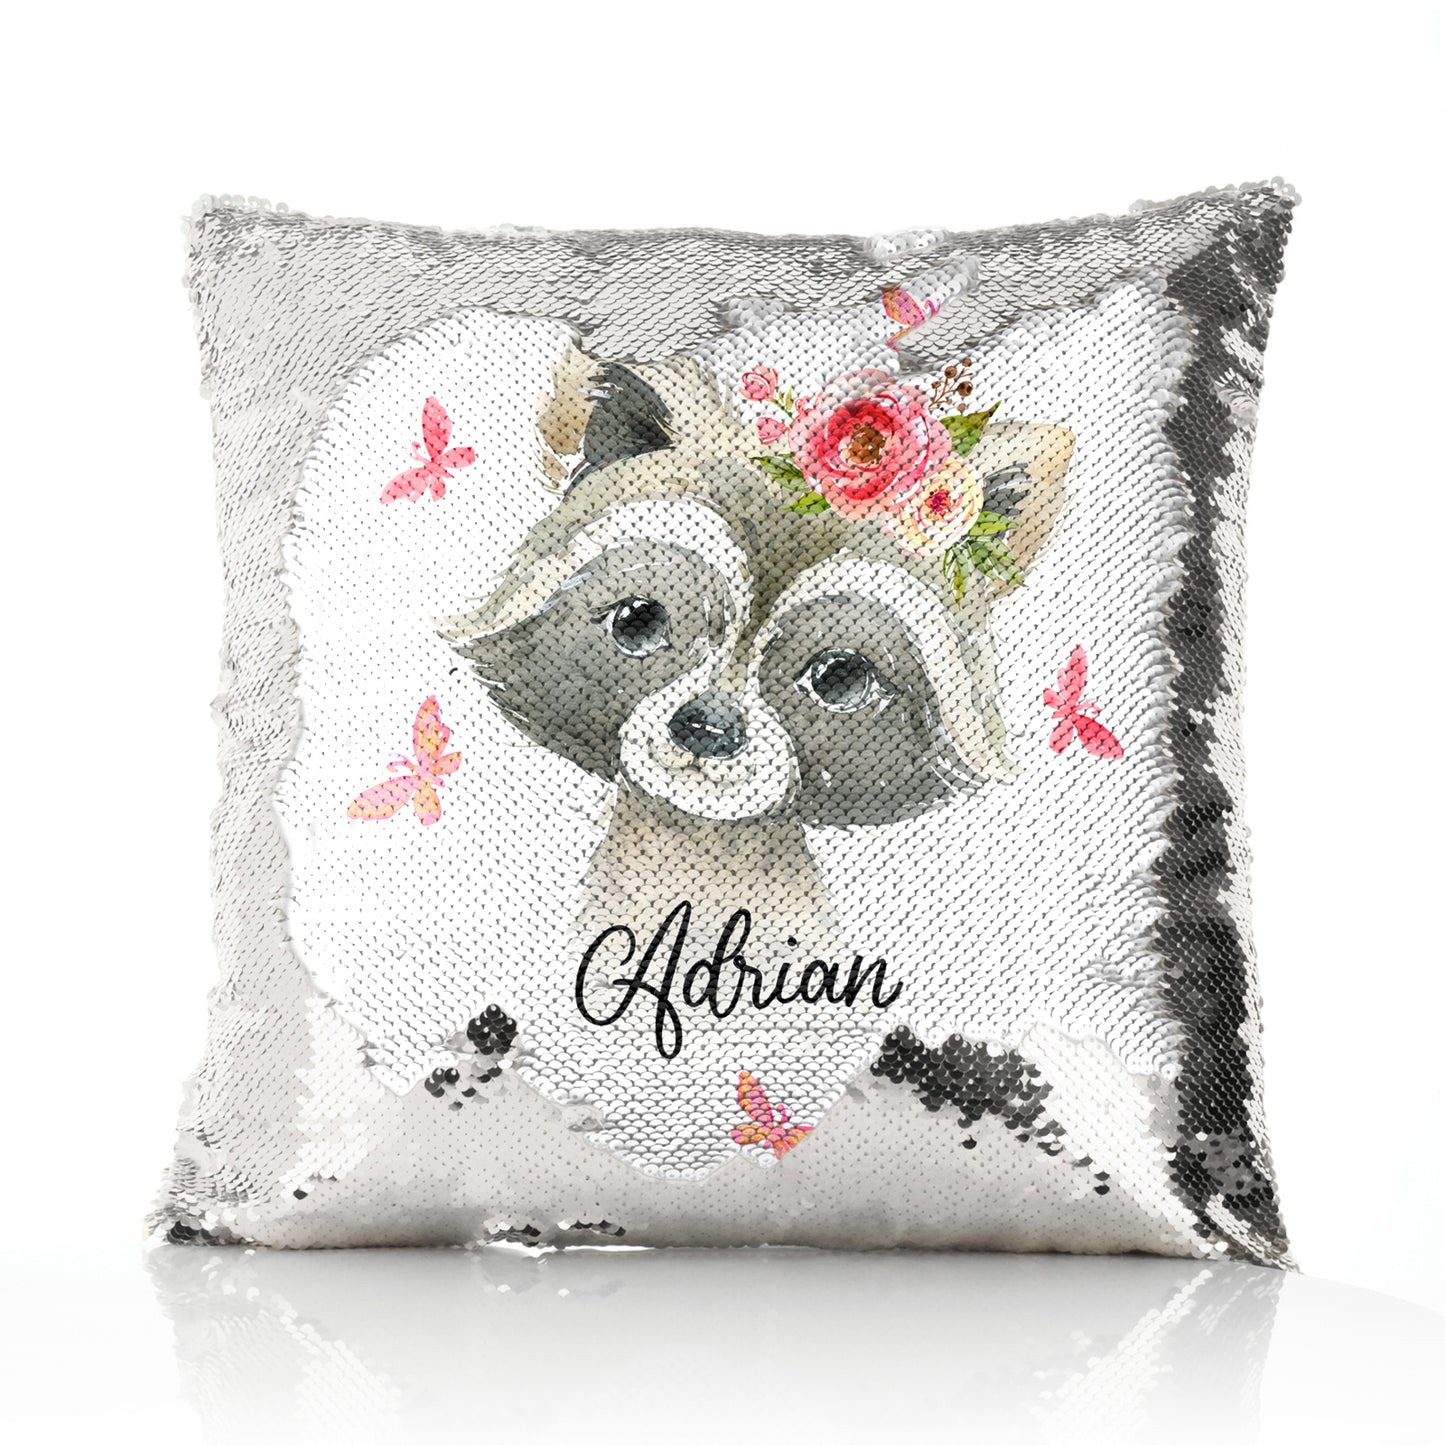 Personalised Sequin Cushion with Raccoon Pink Butterfly Flowers and Cute Text